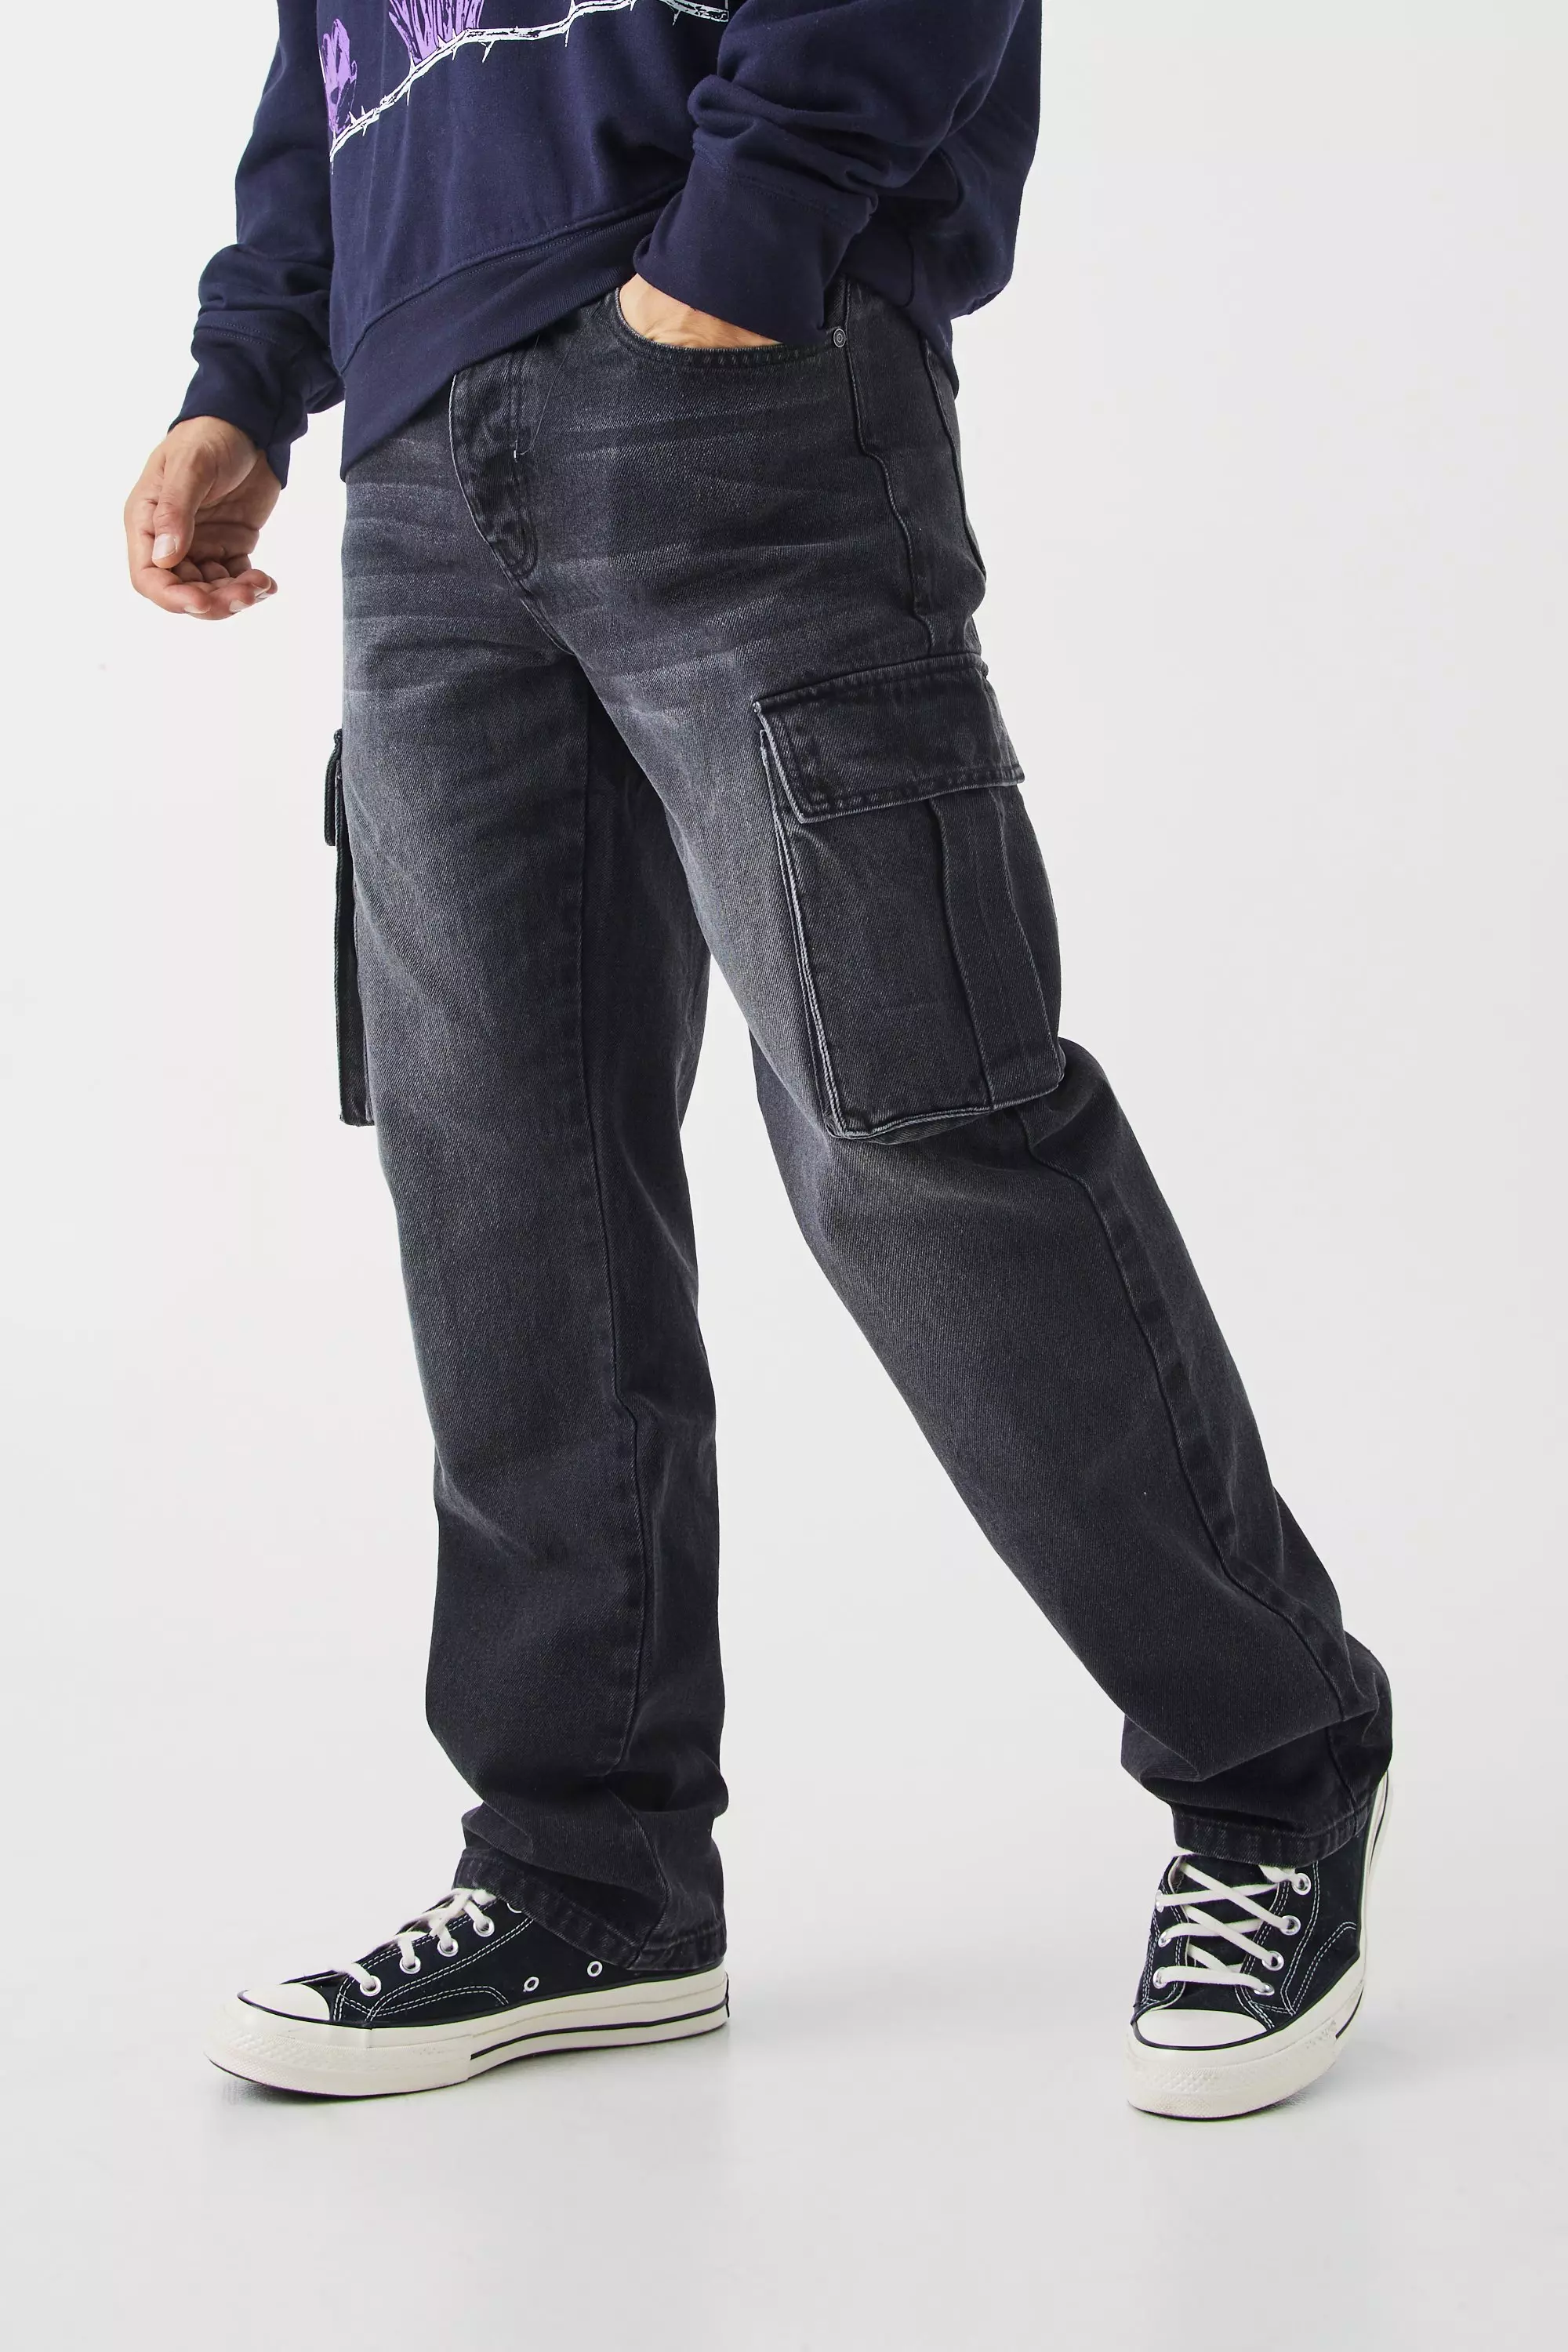 Ash Grey Relaxed Rigid Cargo Jeans